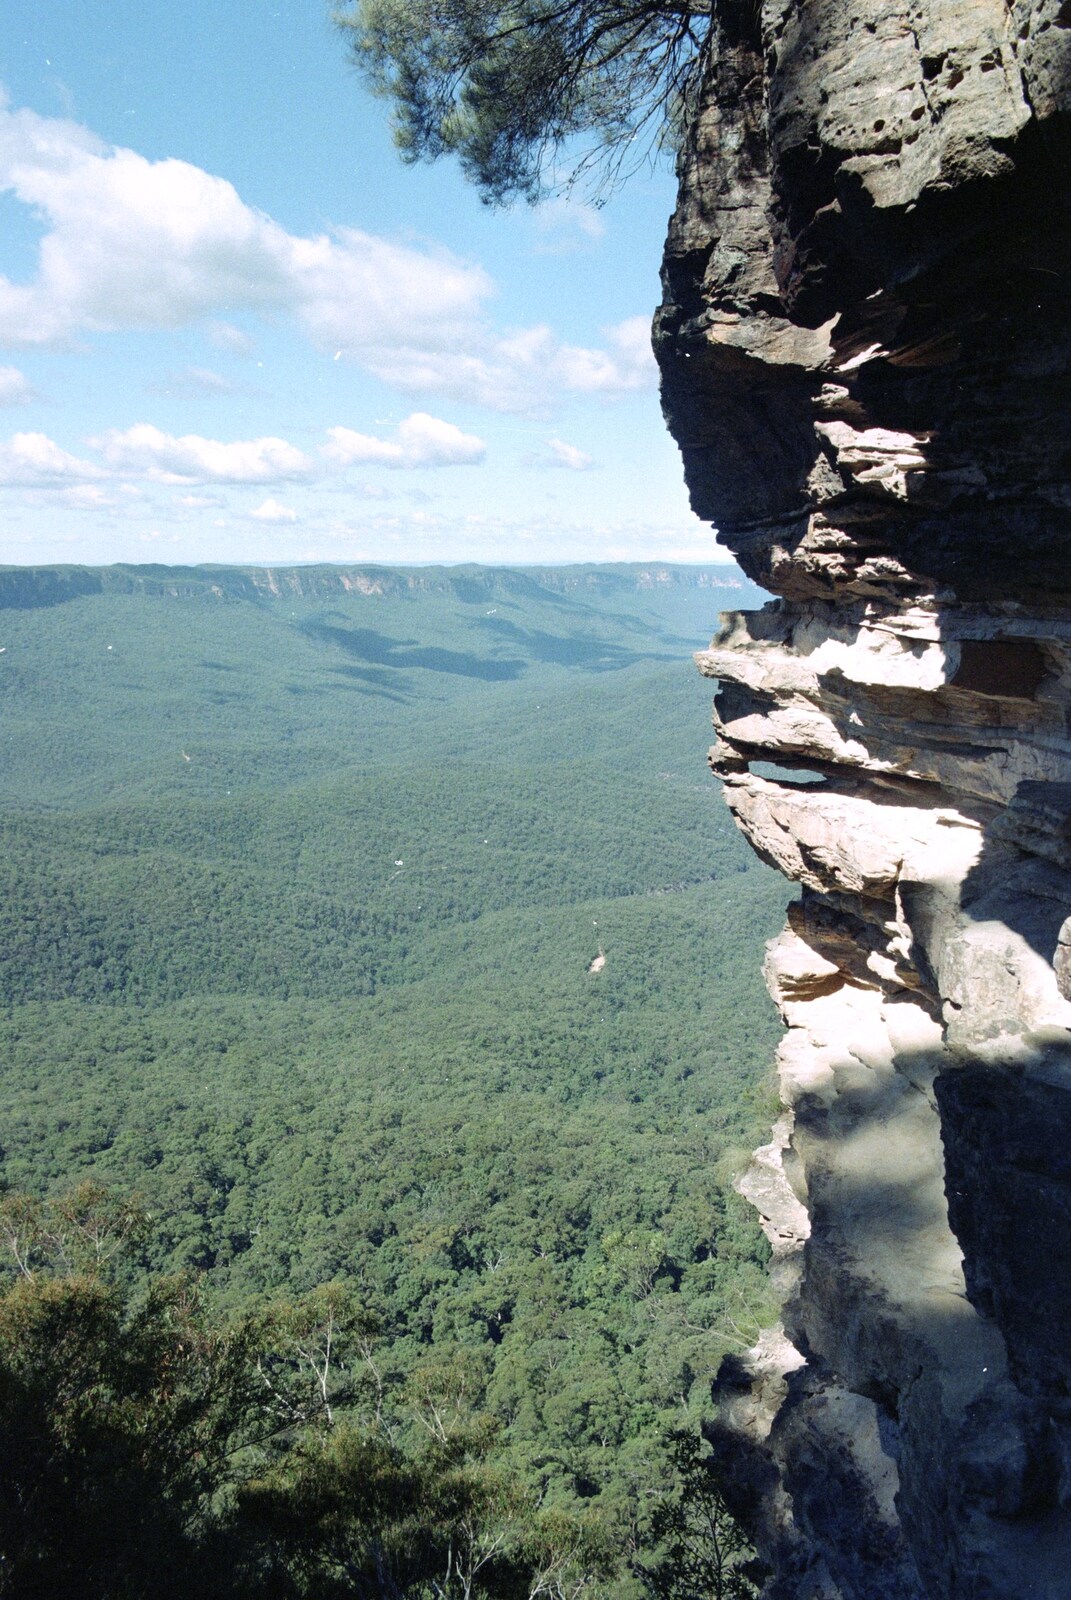 A rocky outcrop gives a sense of height from A Trip to the Blue Mountains, New South Wales, Australia - 12th April 2000